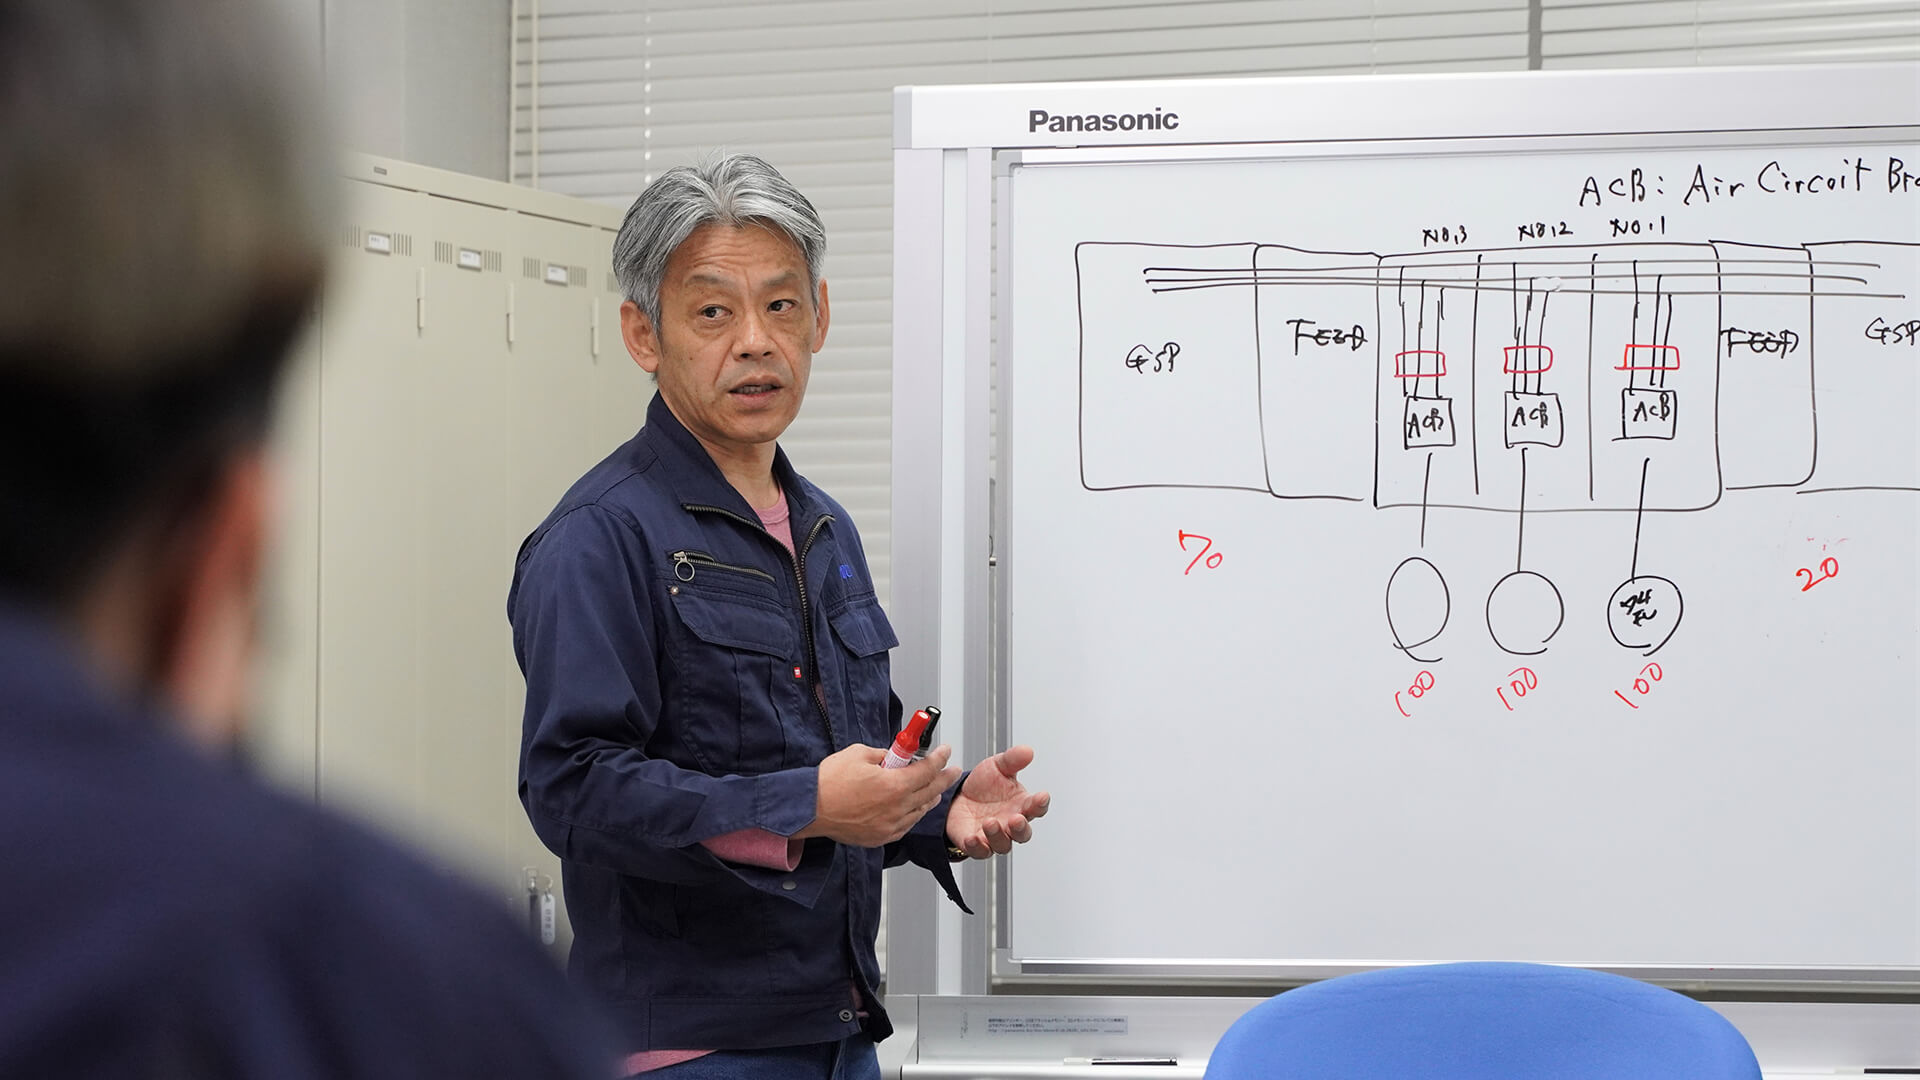 The first 30 minutes is a classroom lecture to review product knowledge and basic electricity.